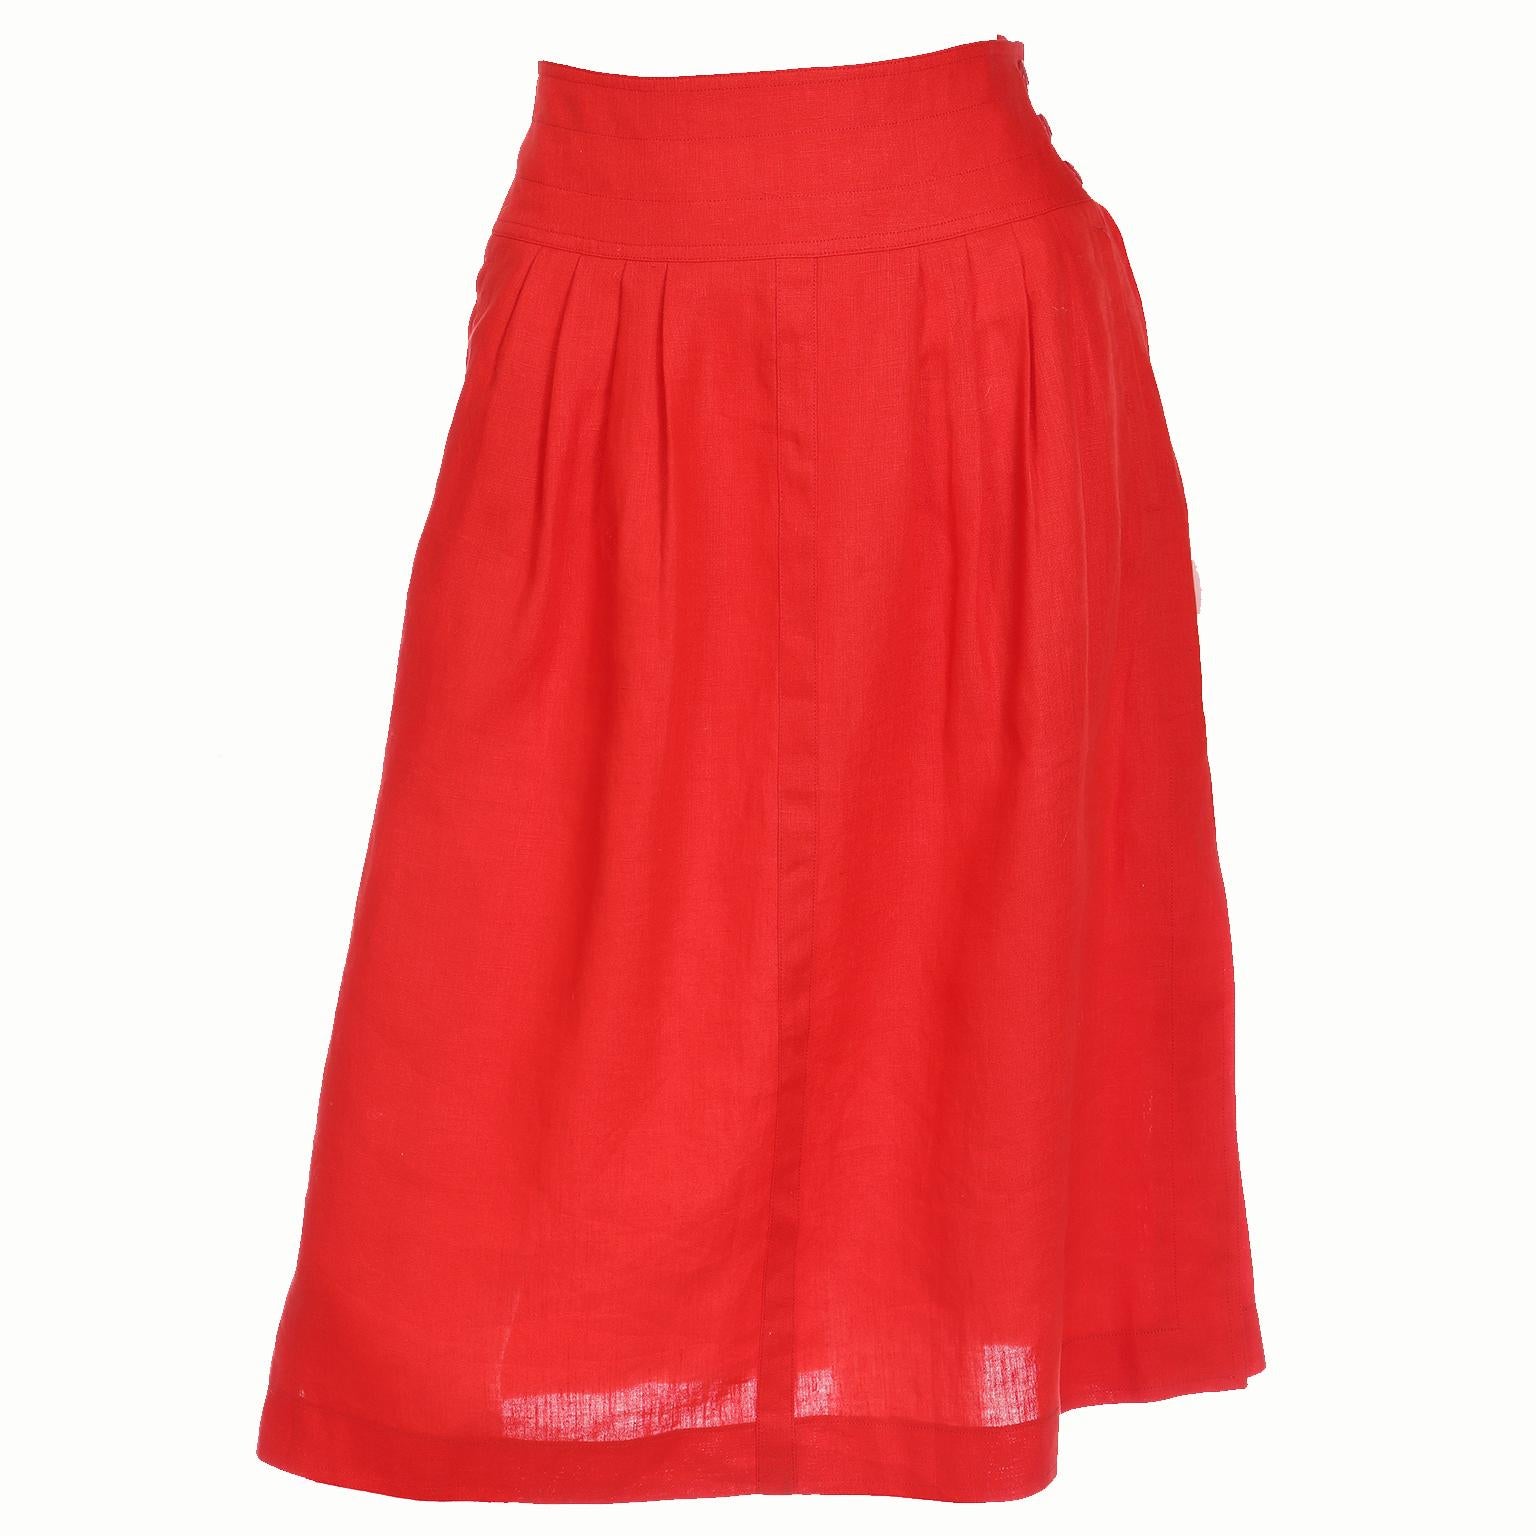 1980s G Gucci Tomato Red 100% Linen Vintage Skirt For Sale 5